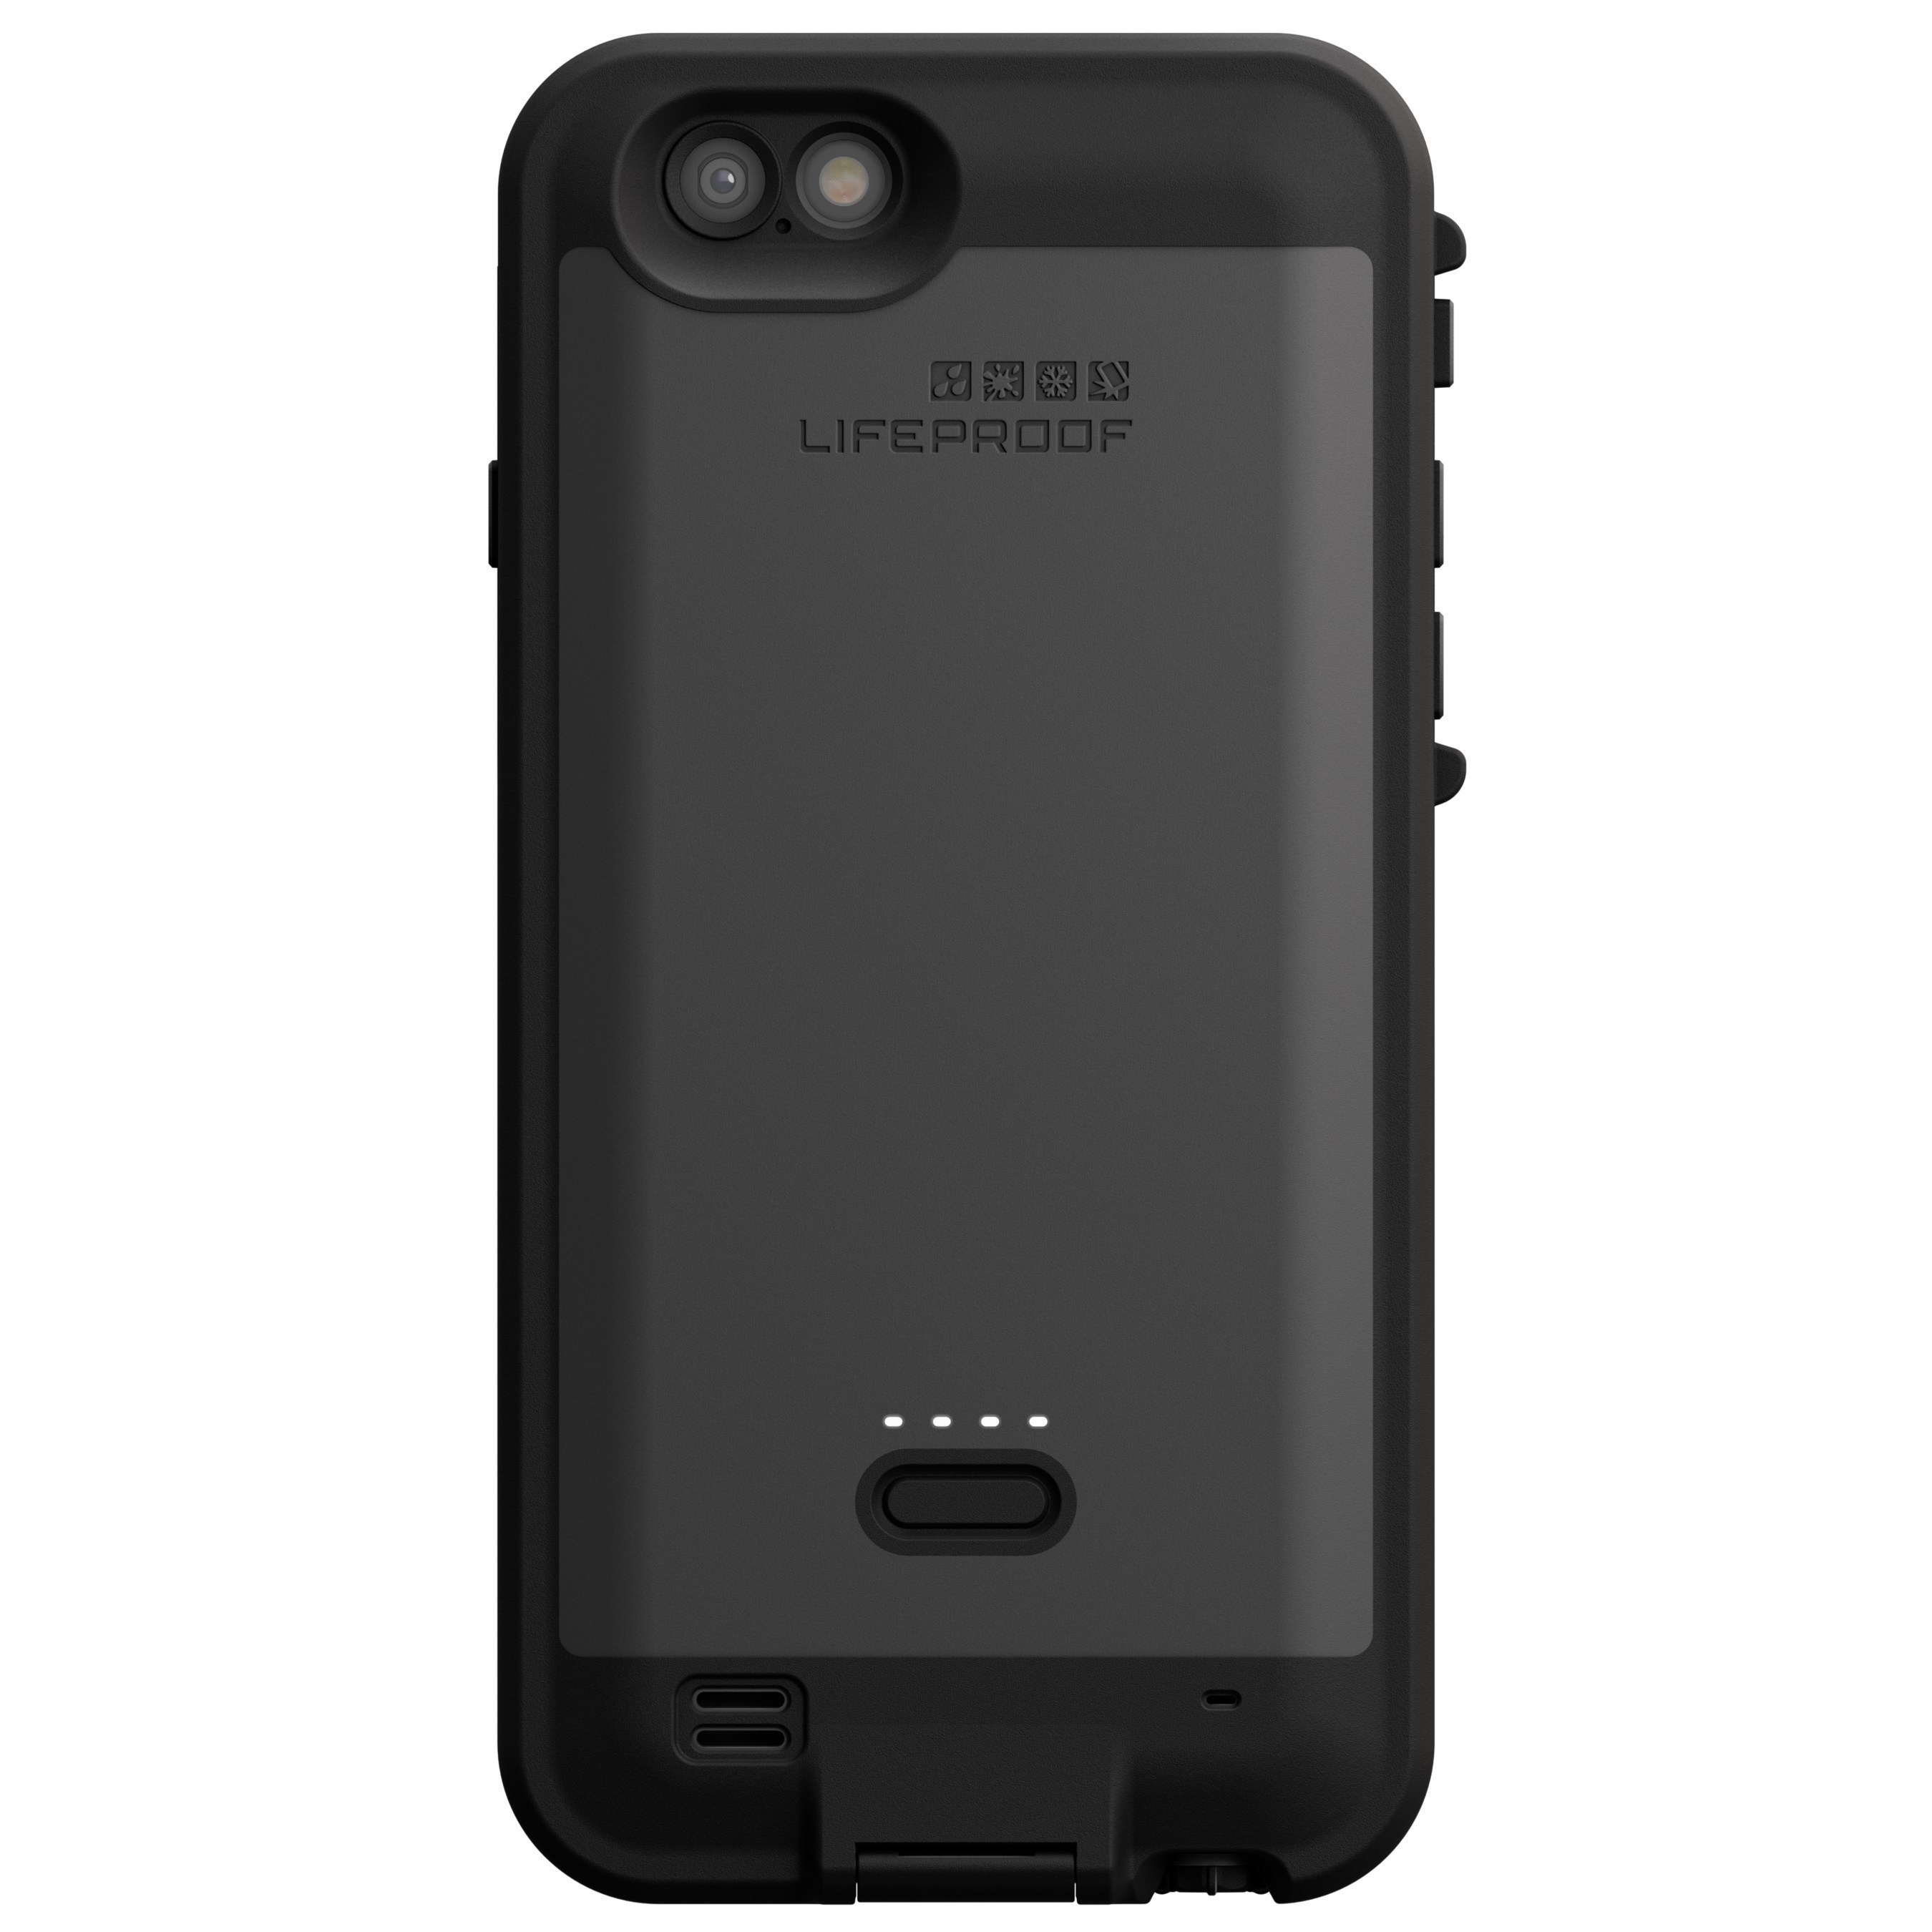 FRE Power for iPhone 6s is available for pre-order on lifeproof.com.